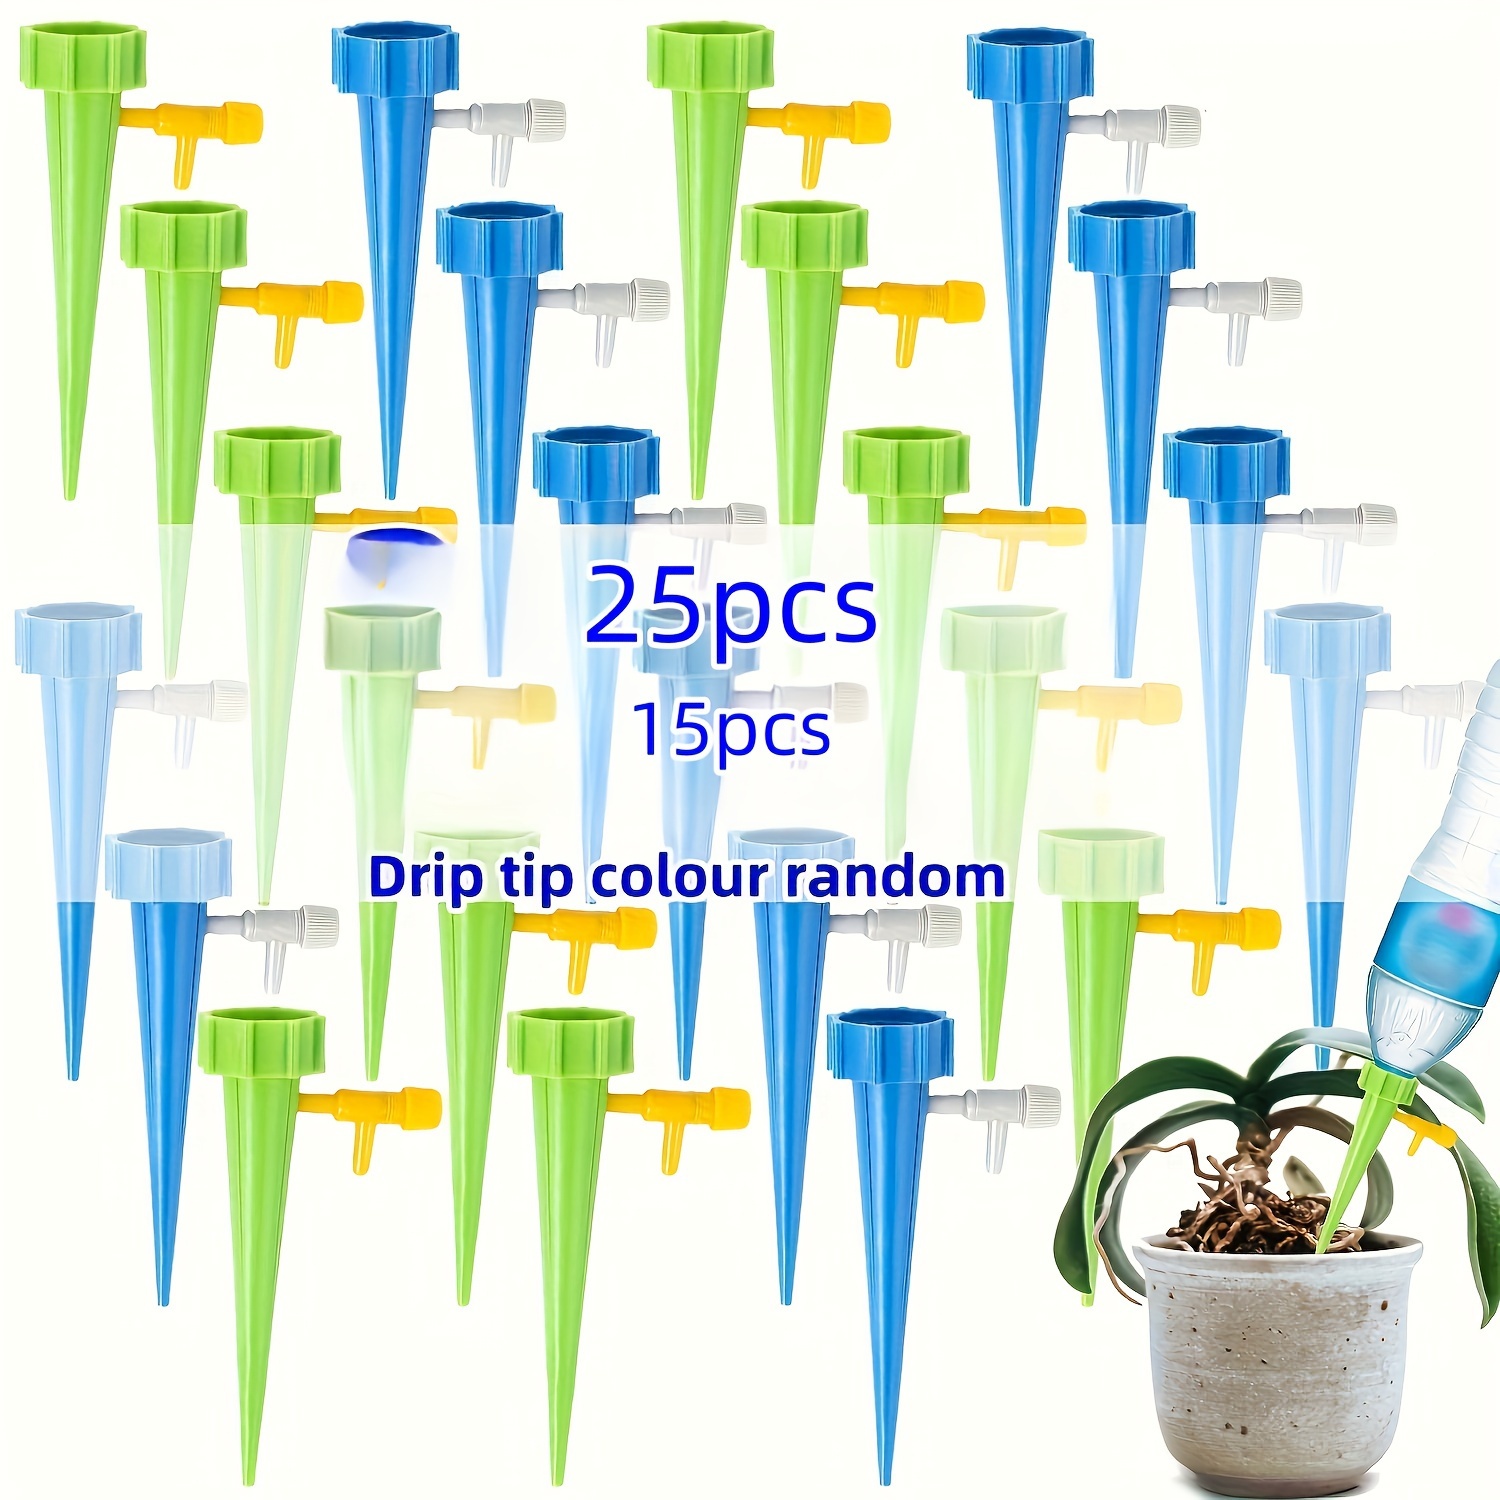 

15pcs/25pcs Adjustable Self-watering Spikes - Automatic Drip Irrigation System For Indoor & Outdoor Plants, Easy Installation Plastic Watering Devices, Mixed Color Pack